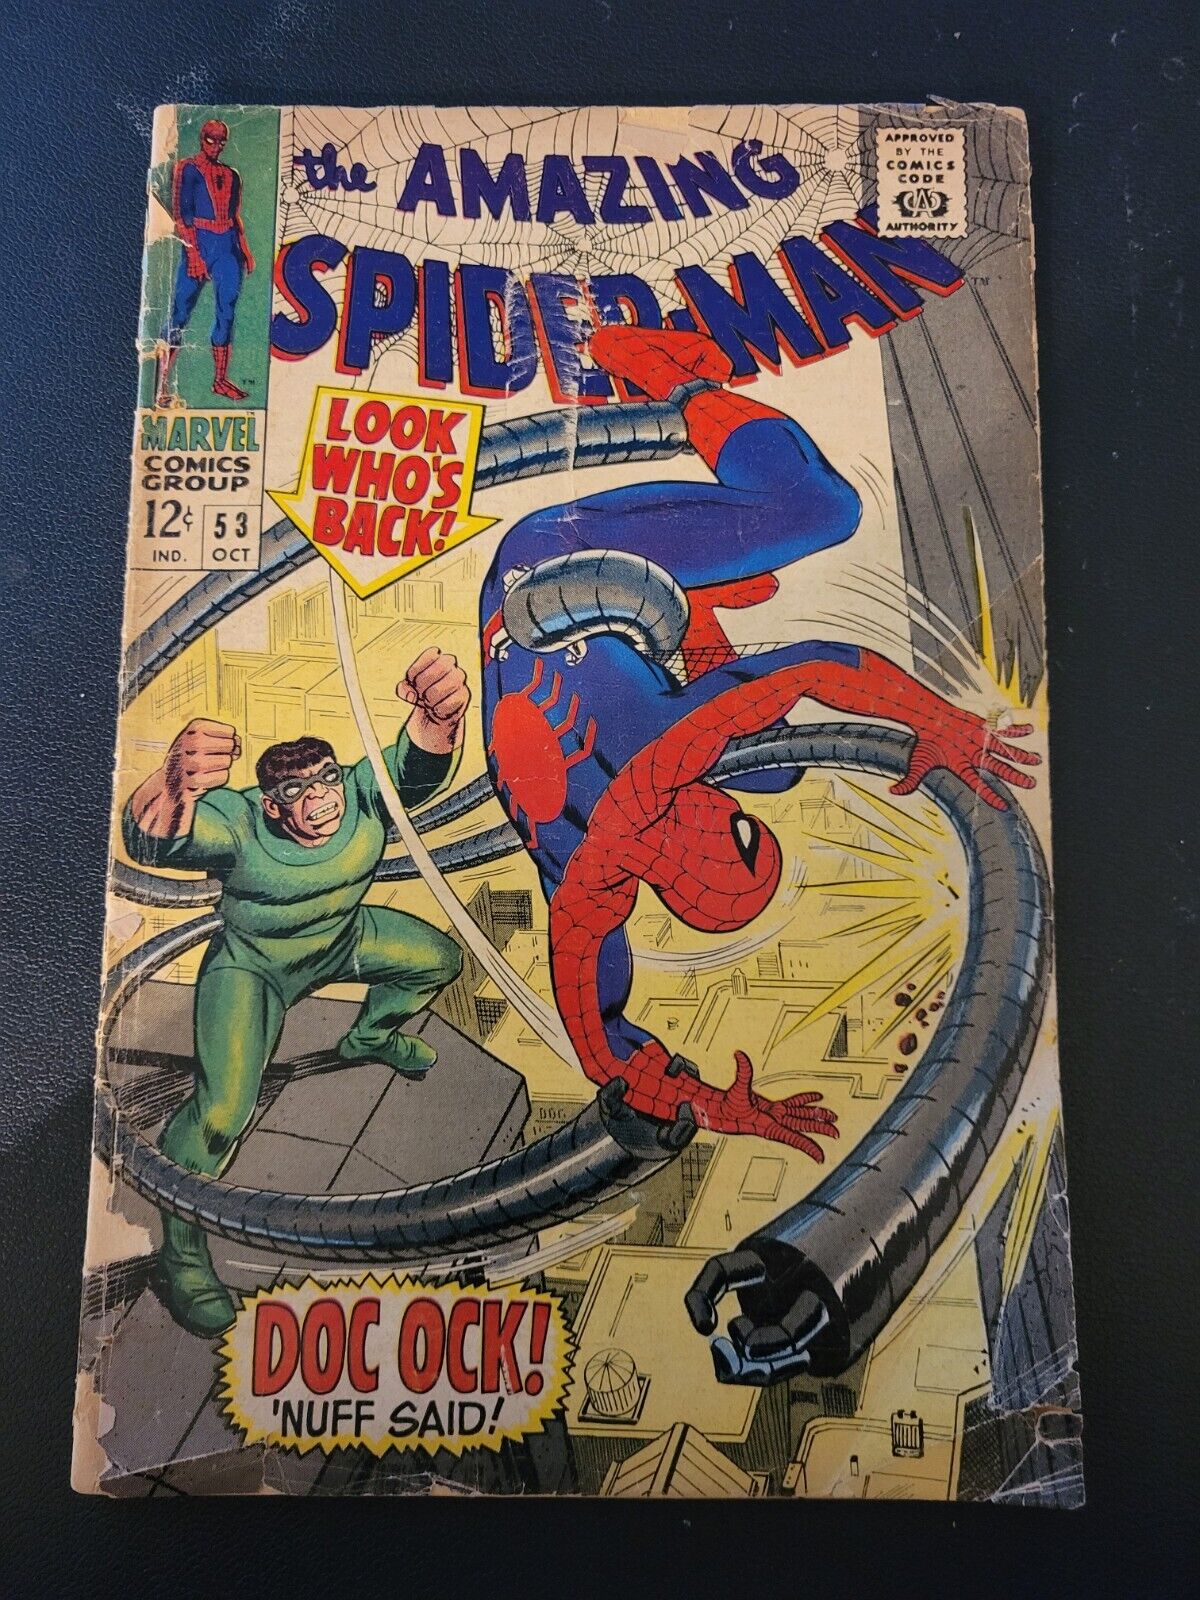 Amazing Spider-Man #53 Doctor Octopus Peter & Gwen Stacy's 1st Date 1967 Rough